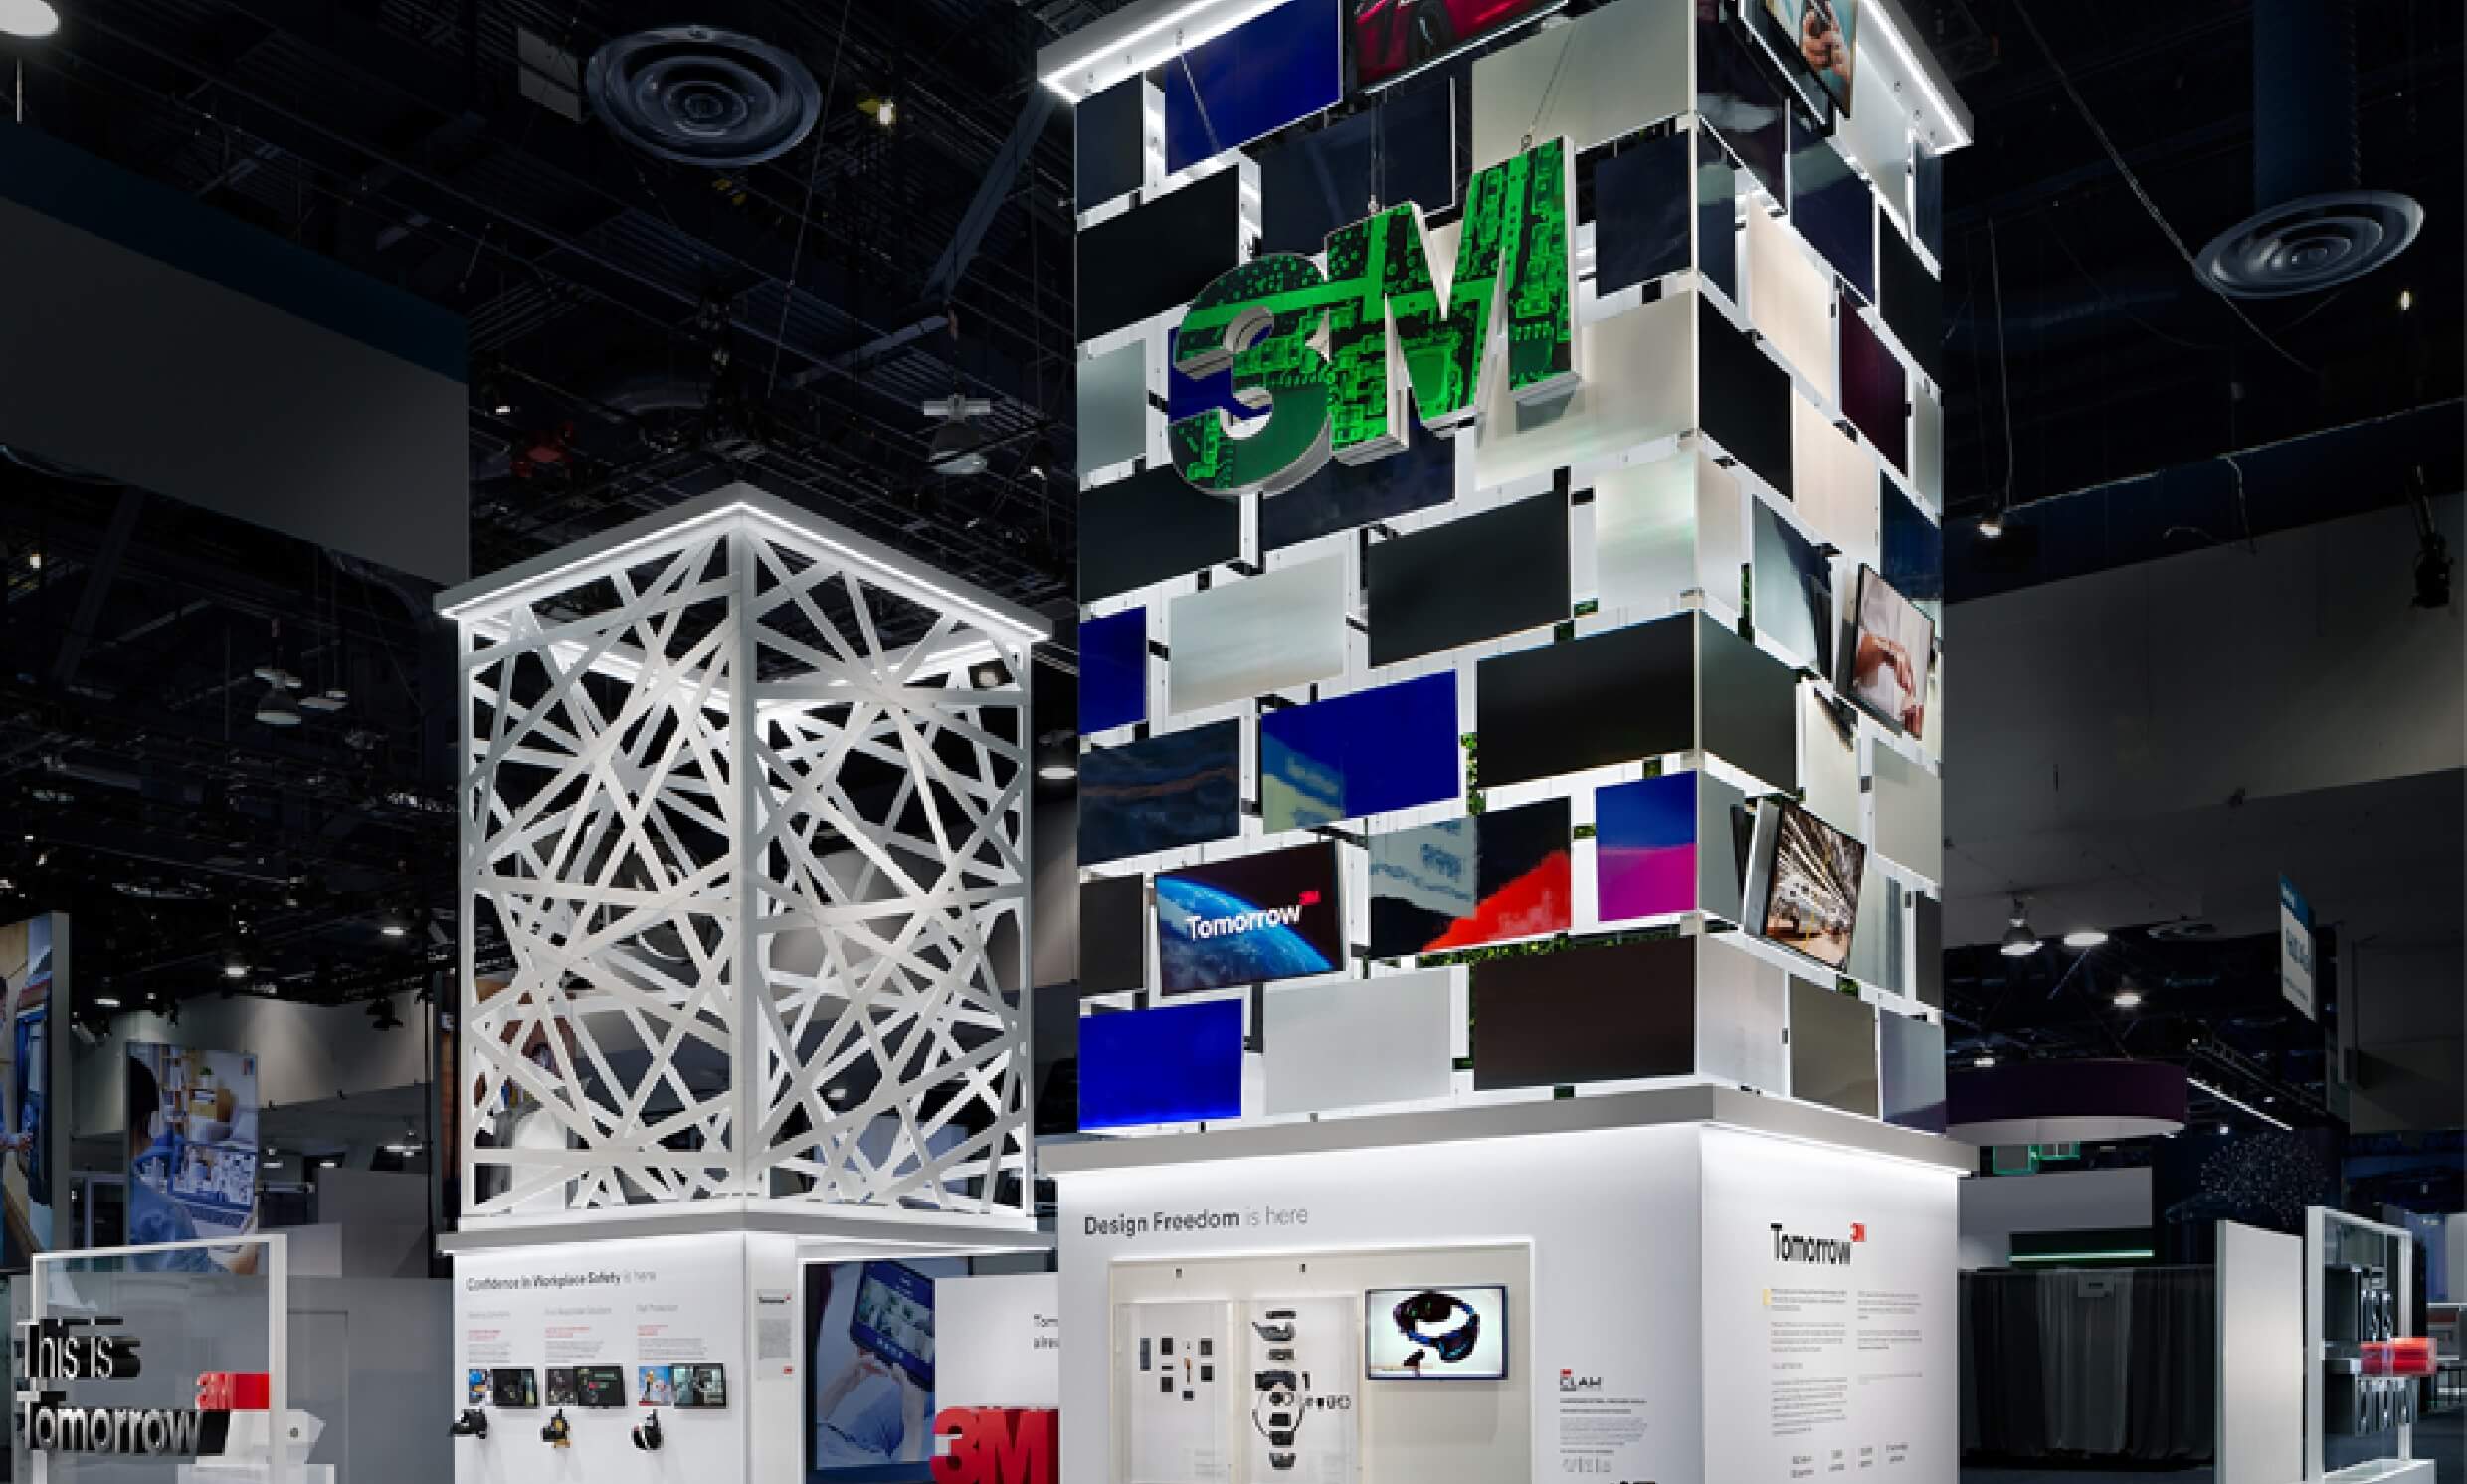 3M marketing displays being used at a convention